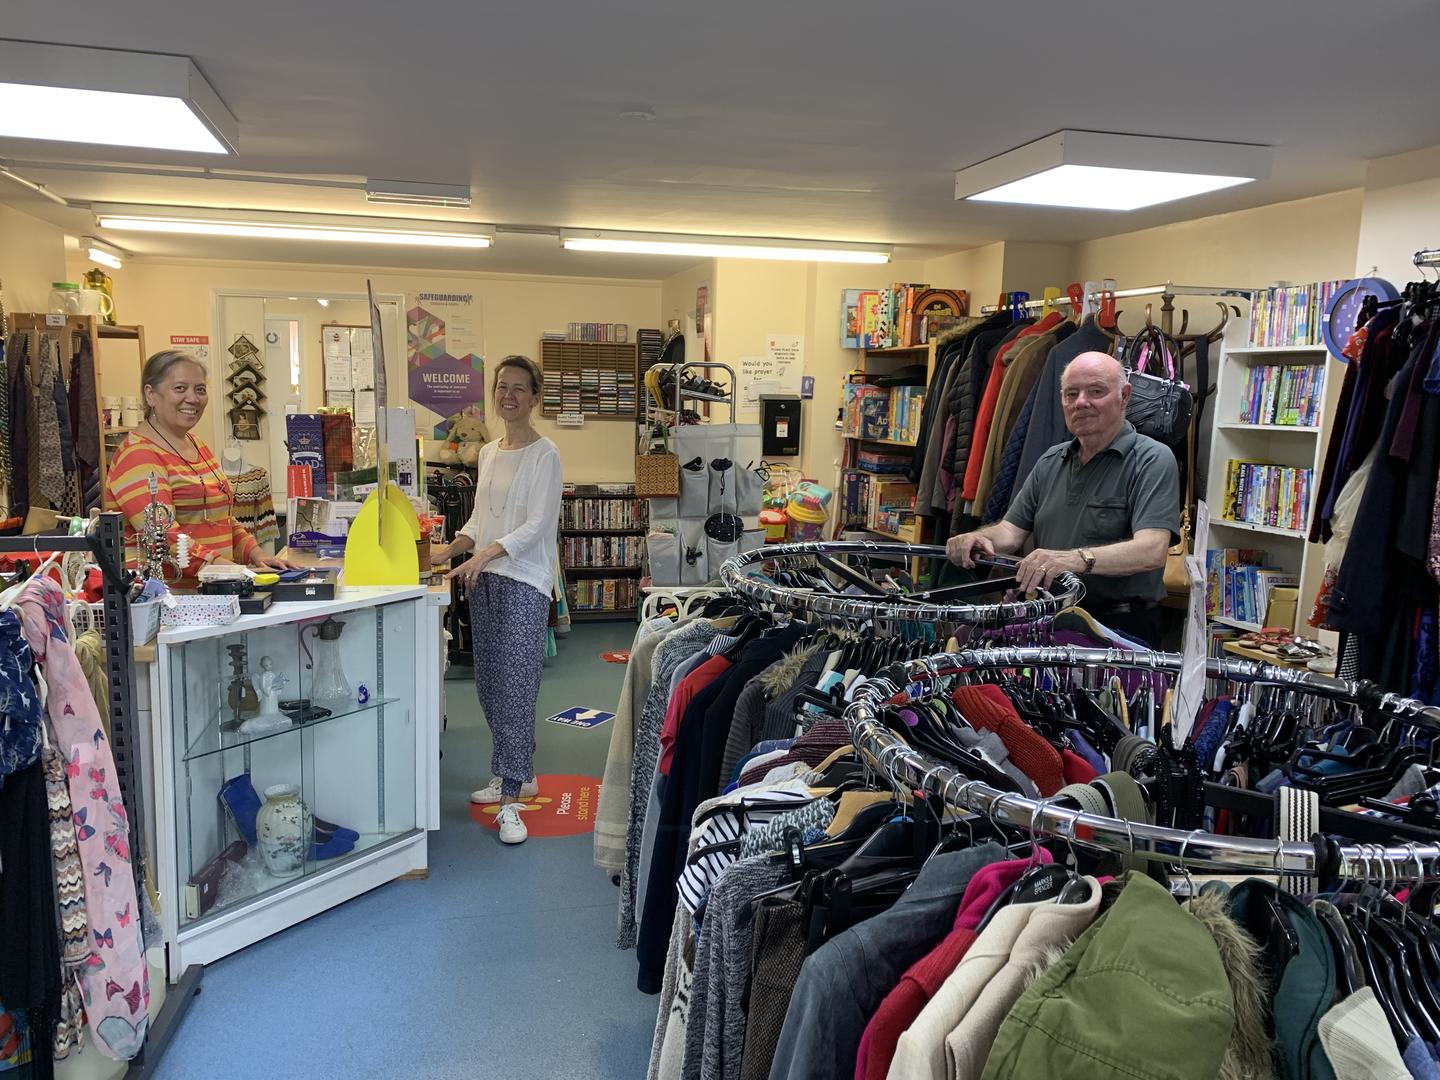 Histon Salvation Army Care & Share Shop welcomes you.